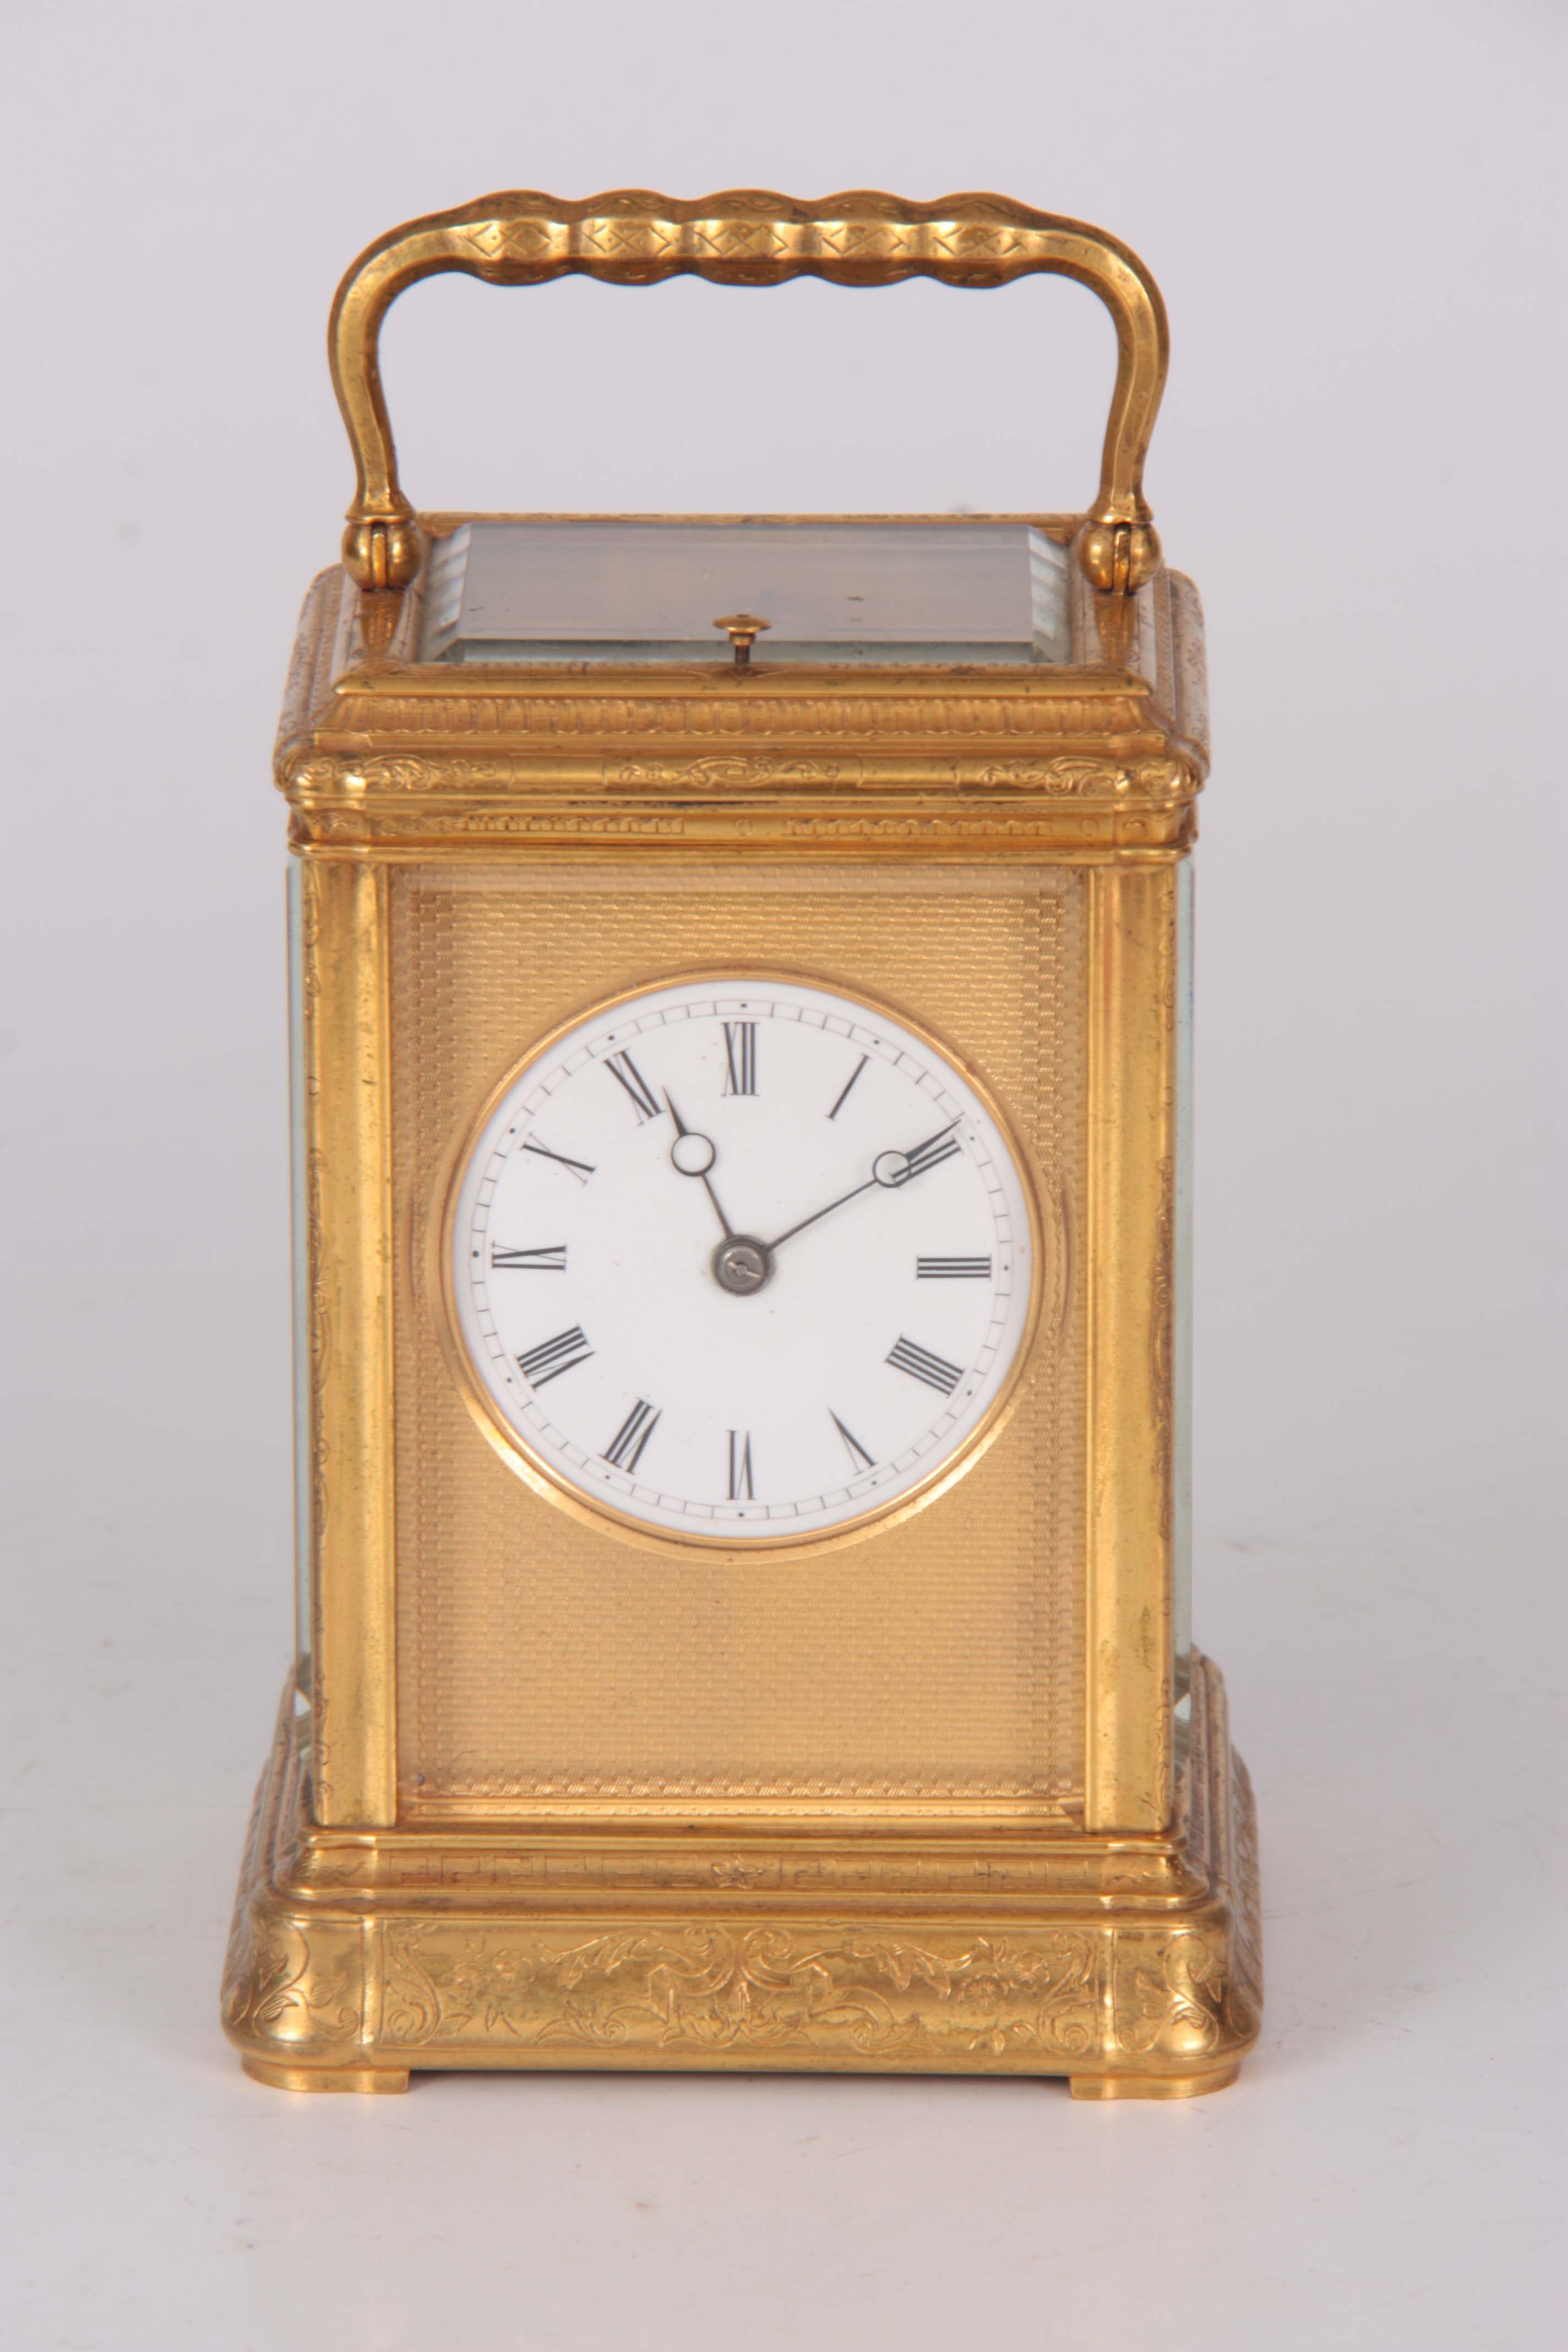 A 19TH CENTURY FRENCH GILT BRASS ENGRAVED GORGE CASE CARRIAGE CLOCK REPEATER with folding handle and - Image 2 of 7